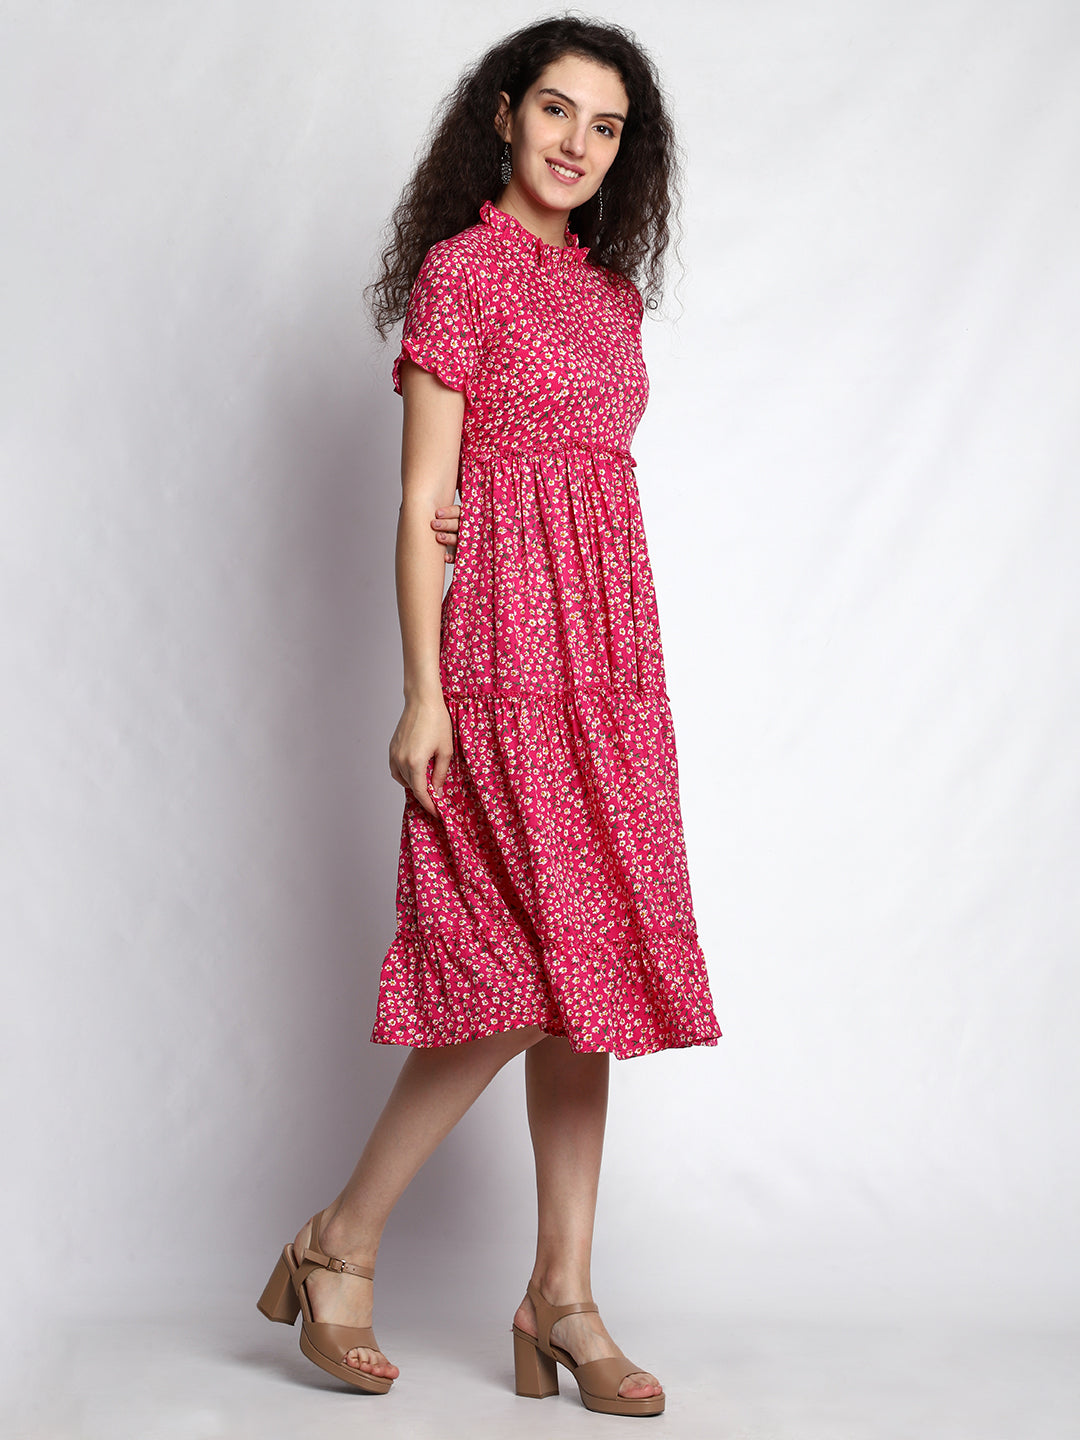 Charming Pink Floral Print Fit and Flare Dress